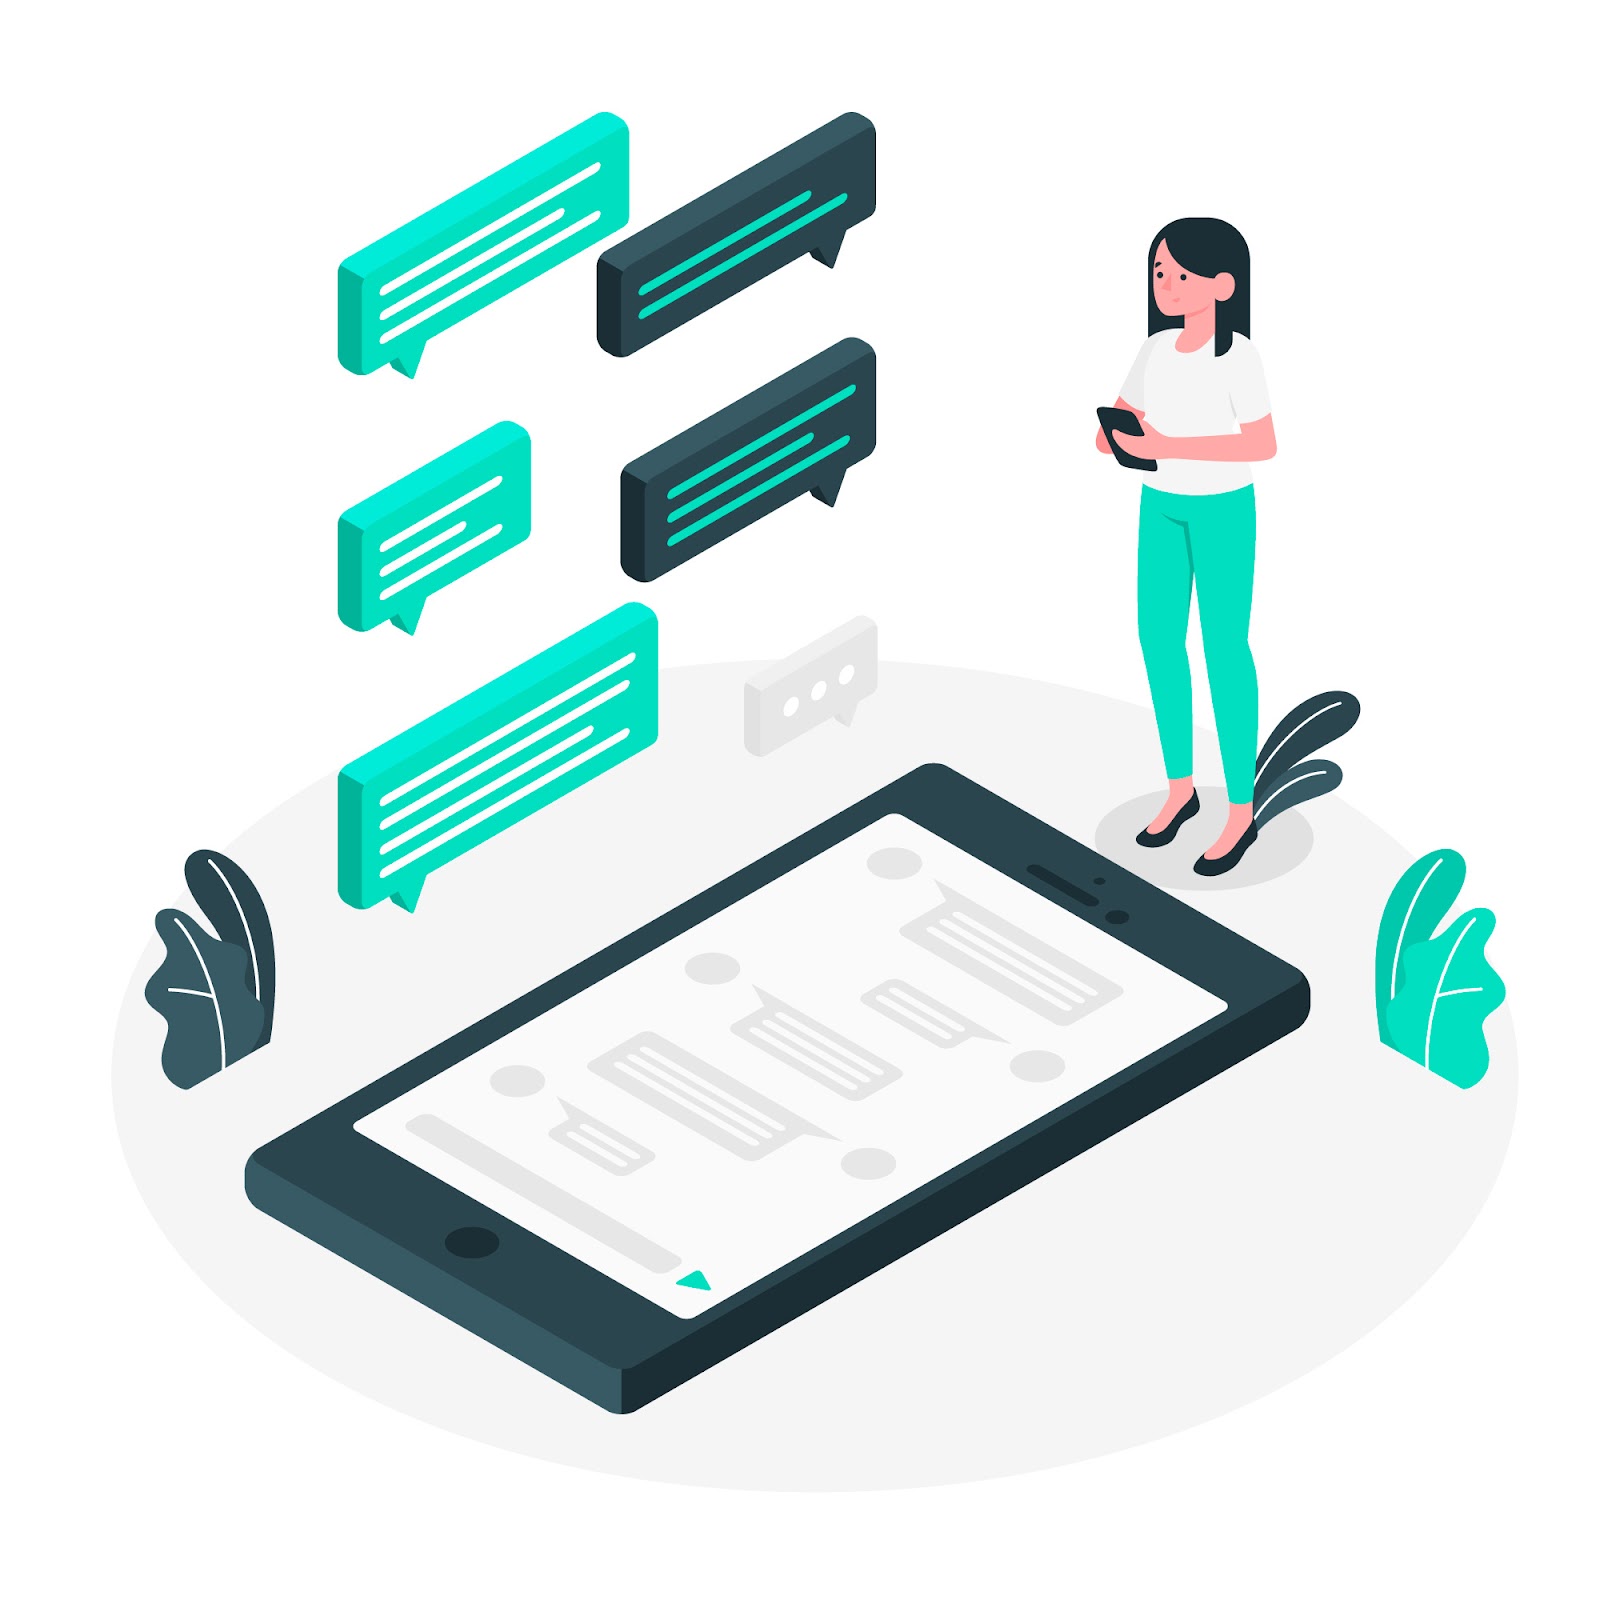 Mobile App Retention Guide - What, Why & Best Practices